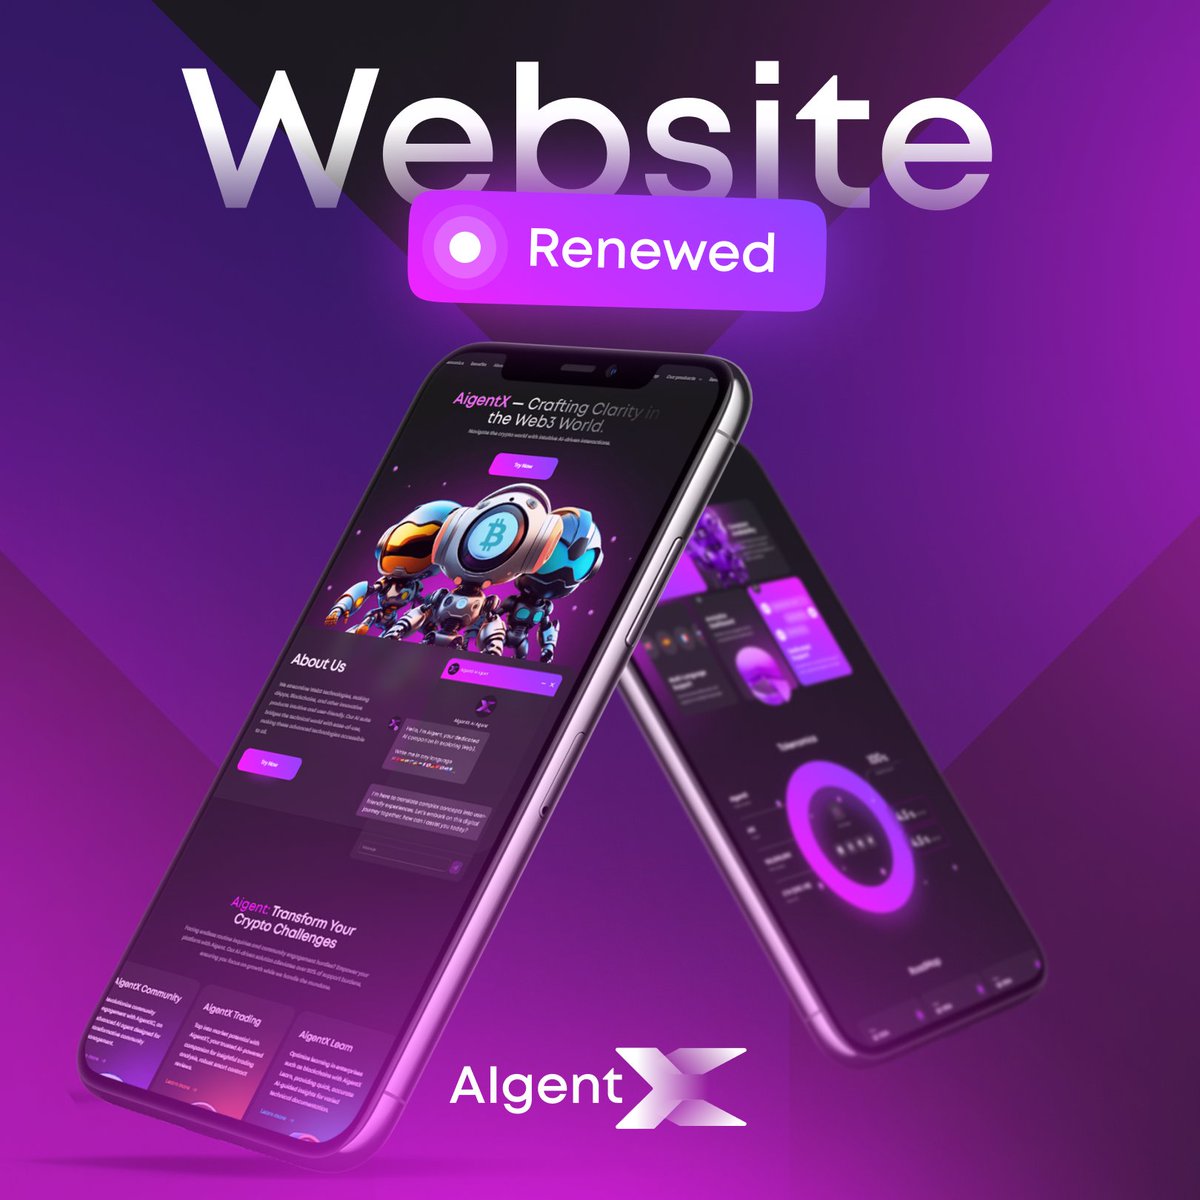 Aigents! 🤖

🔍 We introduce our refreshed #AigentX website! Dive into our revamped website featuring:

Seamless Webapp Access: Now you can log in to our webapp directly from the website.

AigentX Enterprise: Discover our latest #EnterpriseAI solution, tailored for next-level…